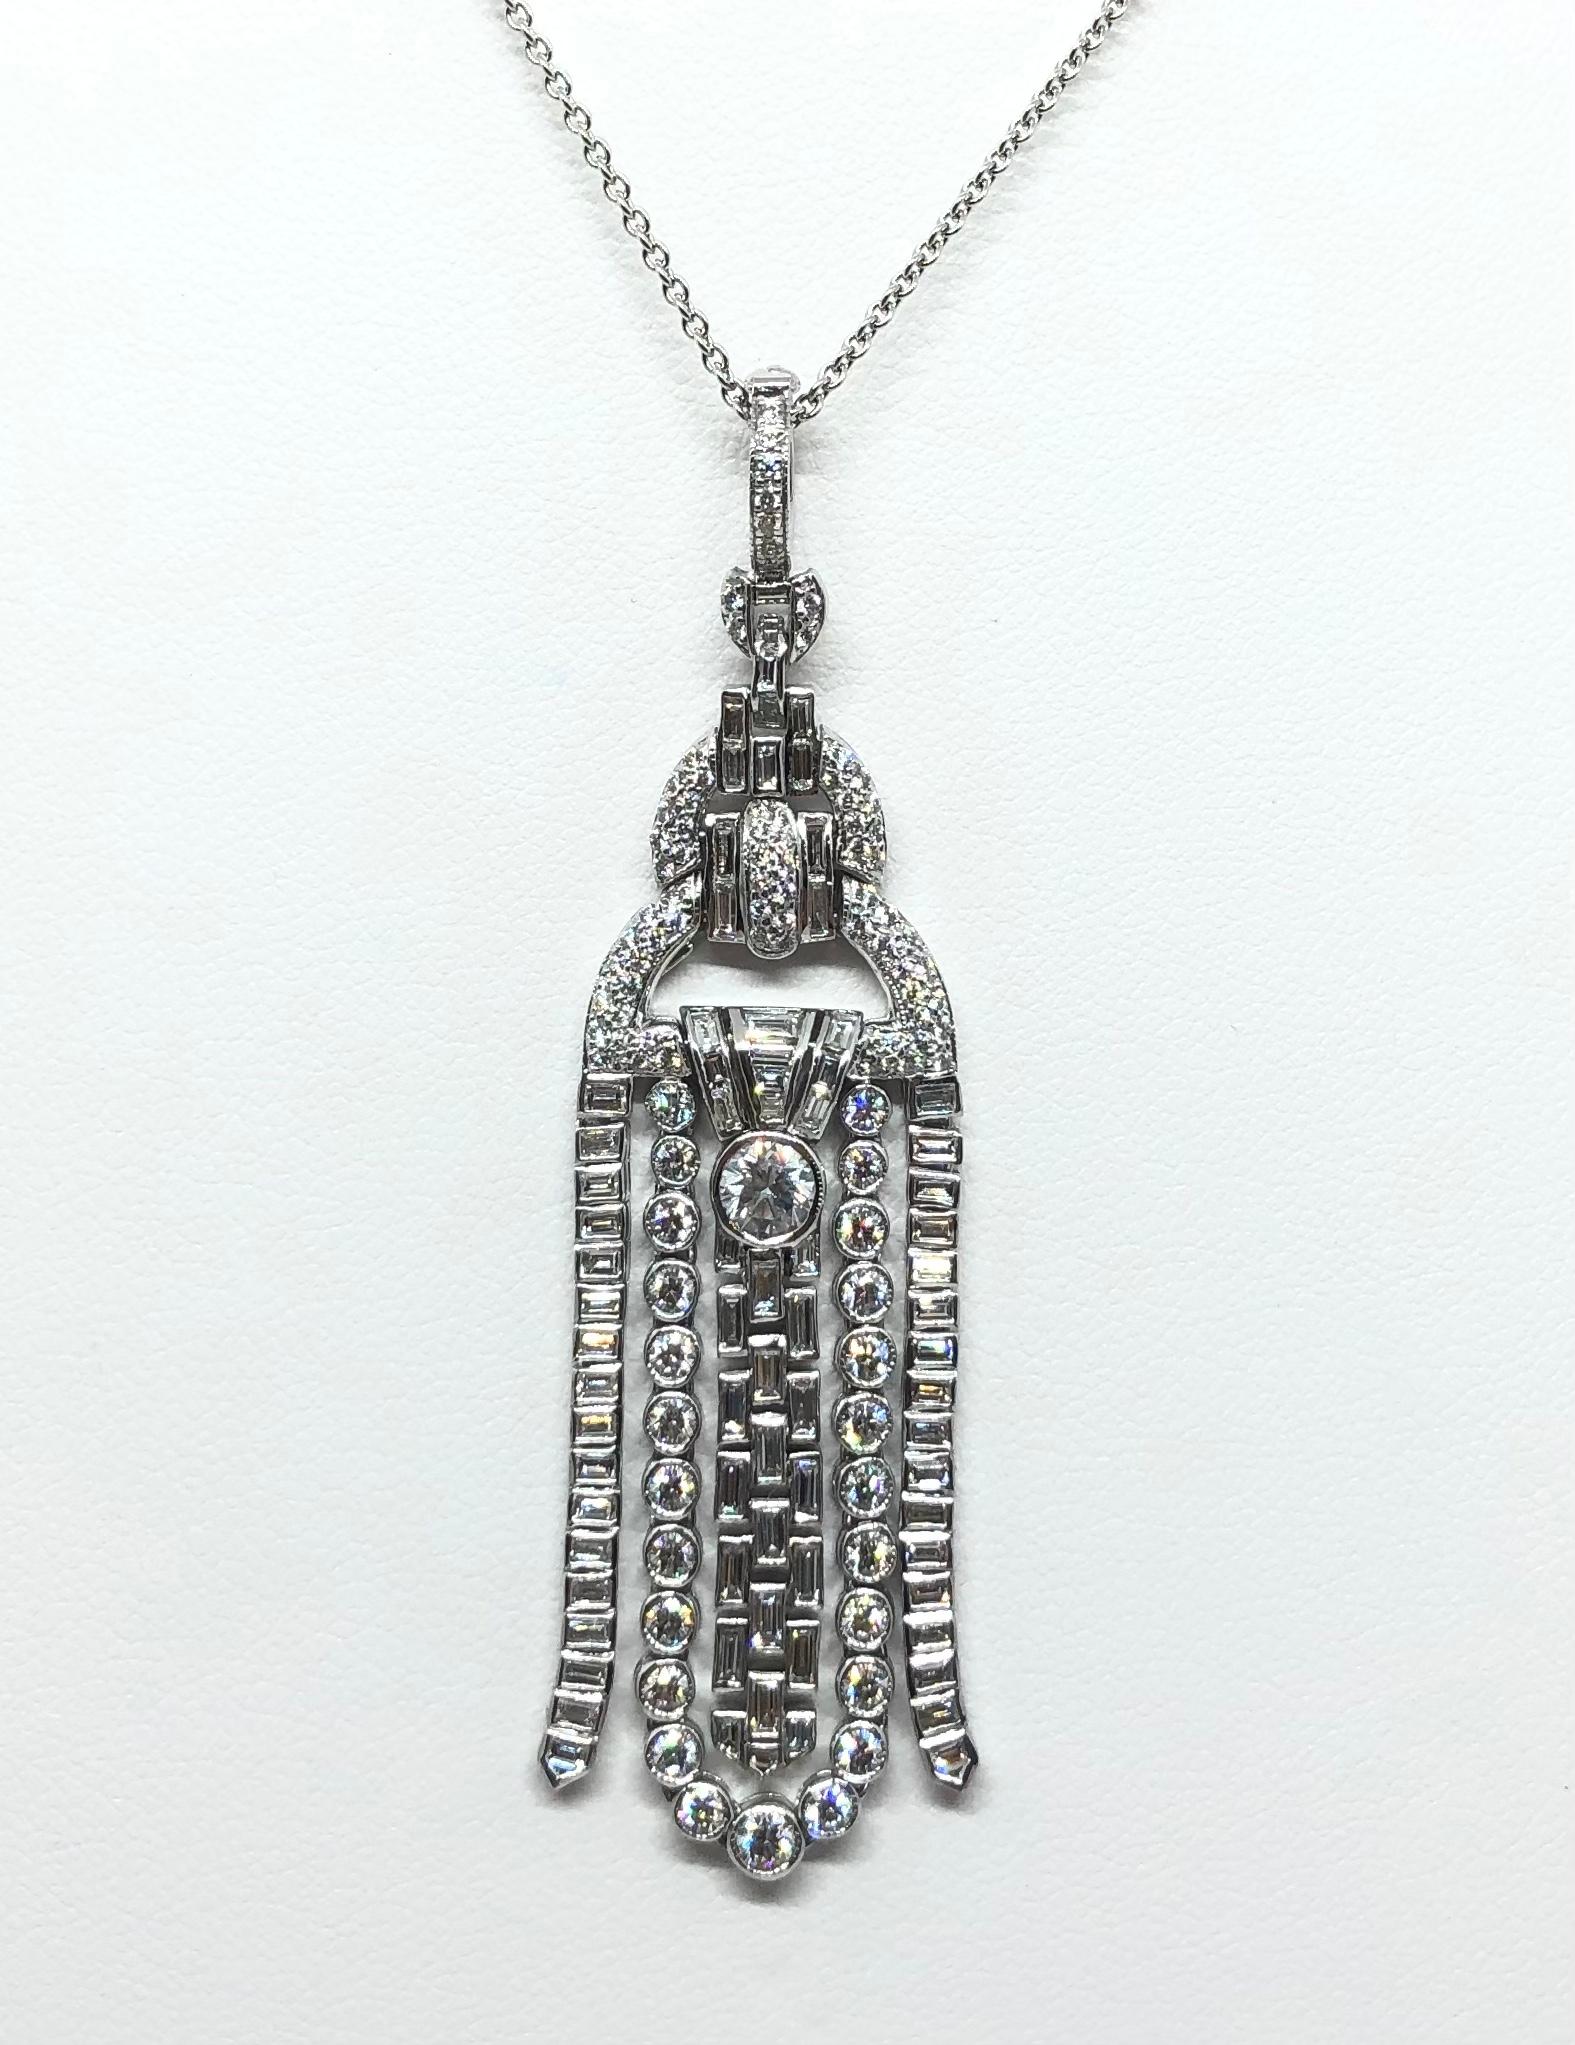 Diamond 2.65 carats Pendant set in 18 Karat White Gold Settings
(chain not included)

Width: 1.6 cm 
Length: 6.8 cm
Total Weight: 12.2 grams

